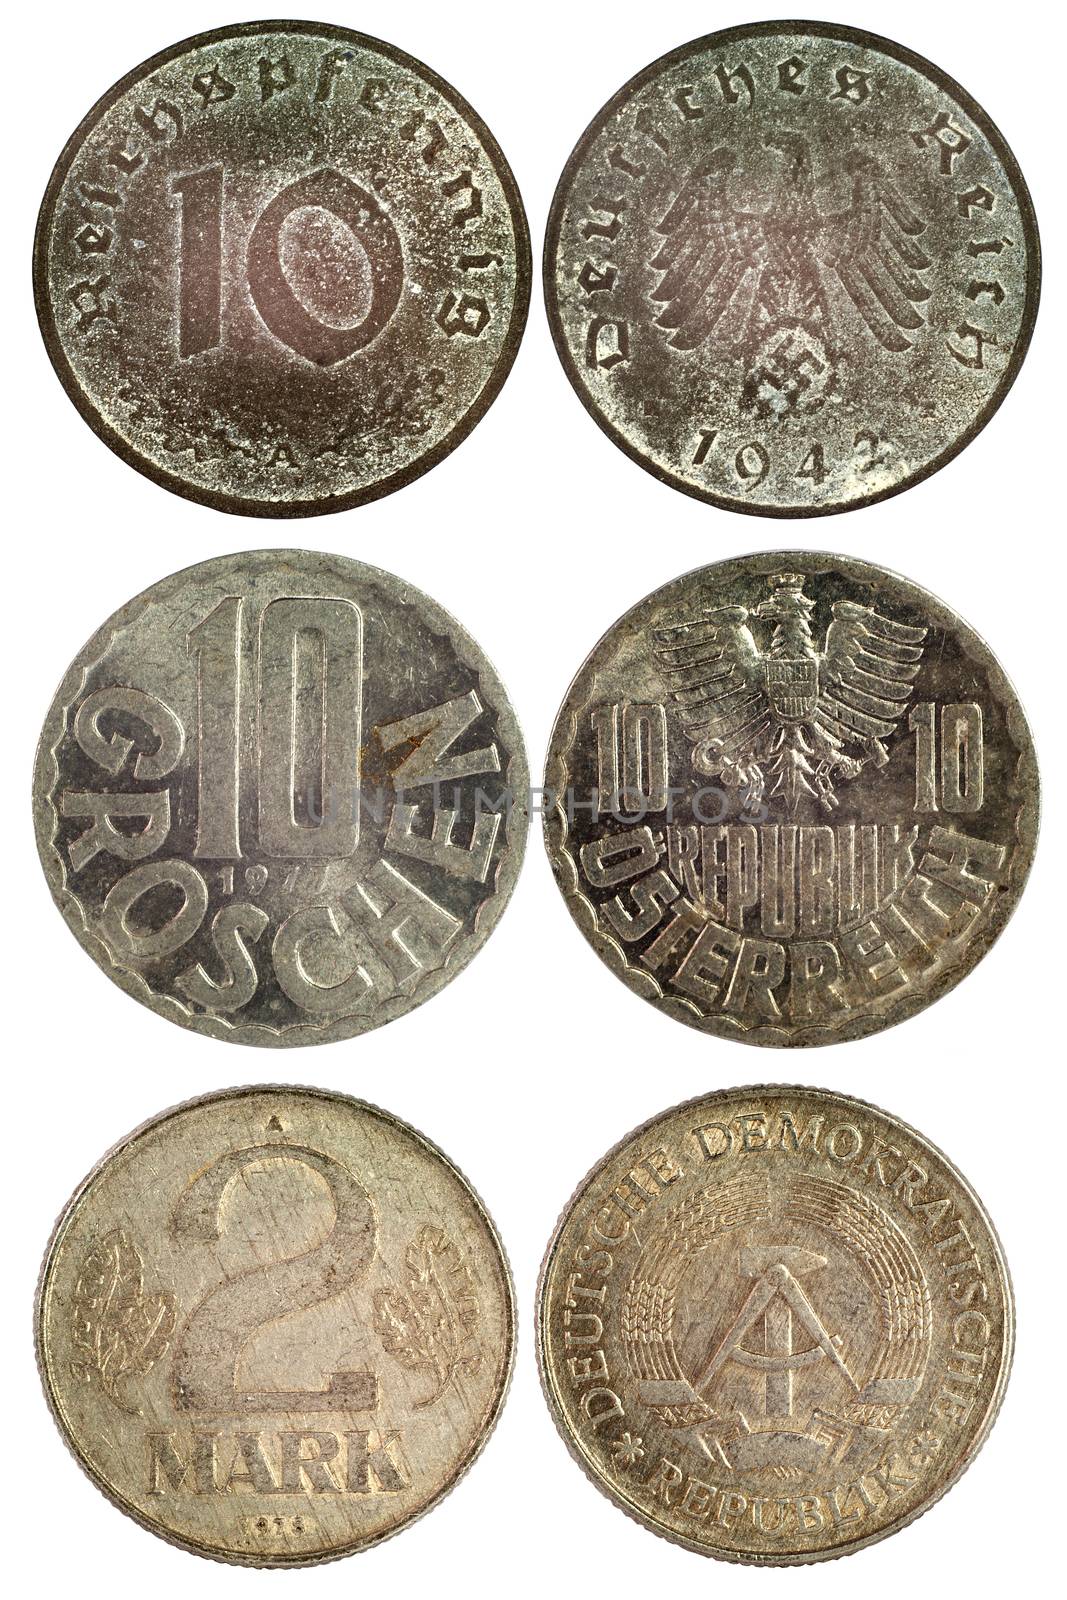 rare vintage different coins of germany isolated on white background